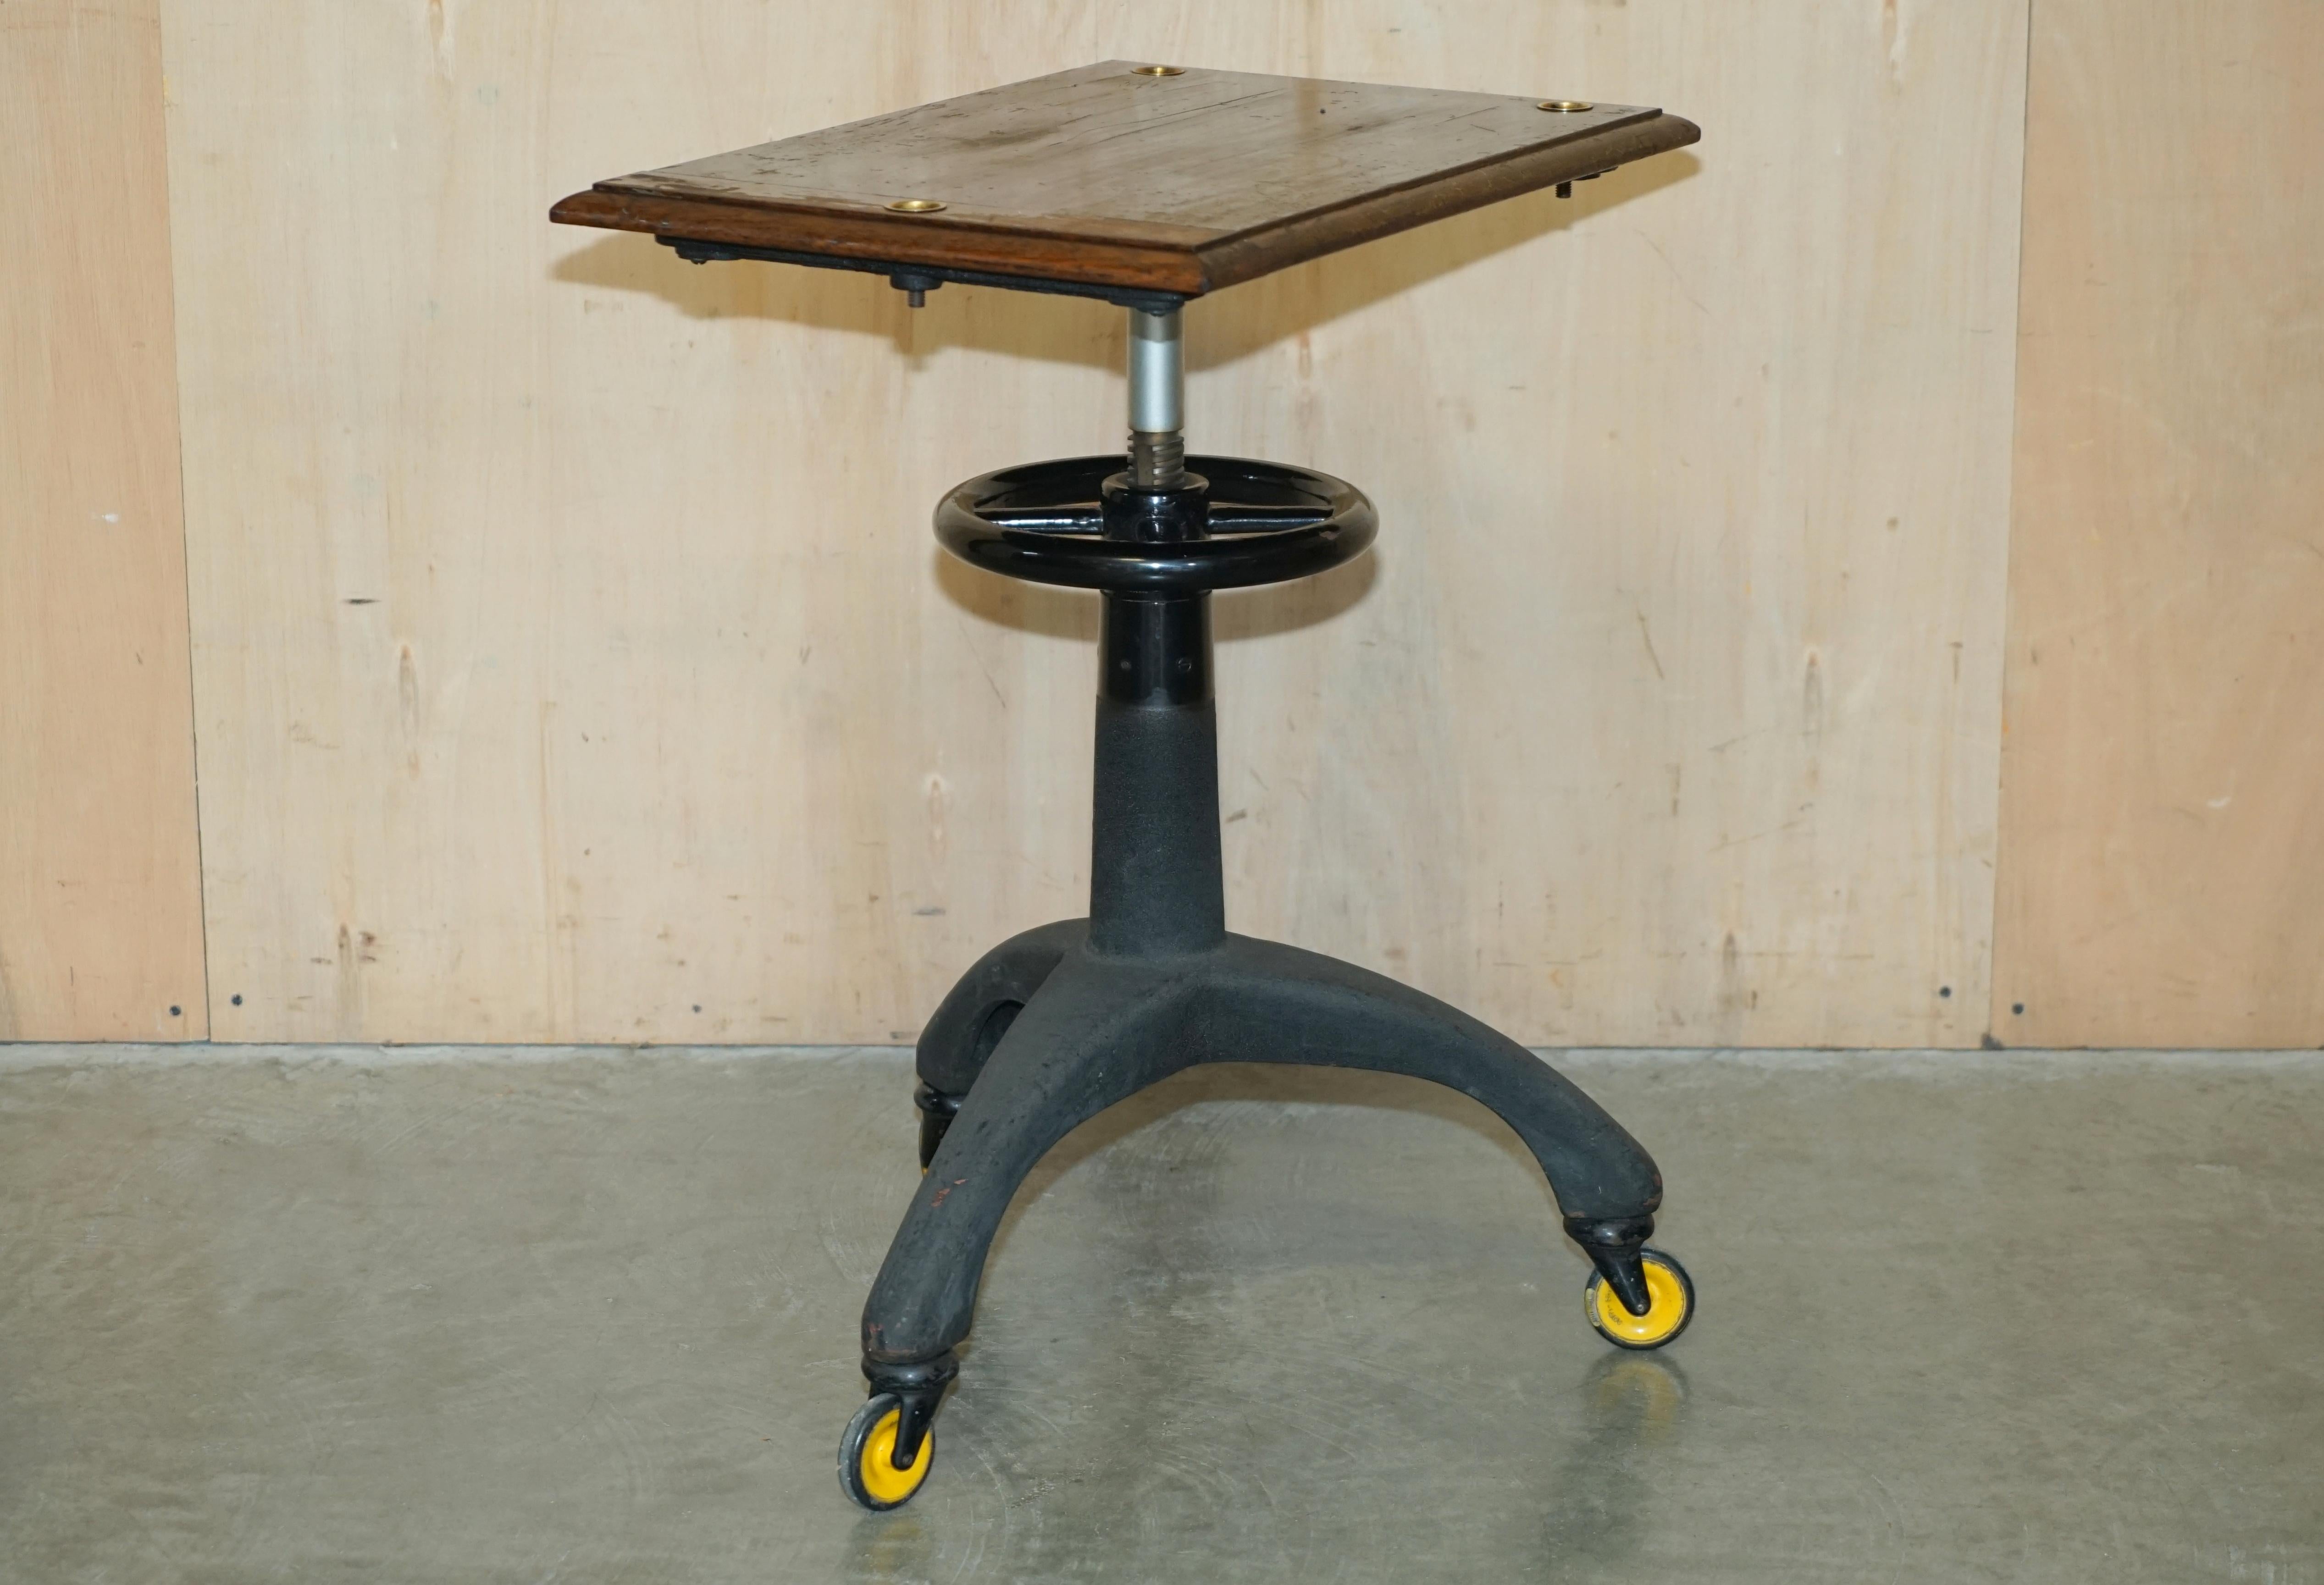 Royal House Antiques

Royal House Antiques is delighted to offer for sale this Vintage circa 1920's Hamblin London LTD height adjustable Opticians table with wheels

Please note the delivery fee listed is just a guide, it covers within the M25 only